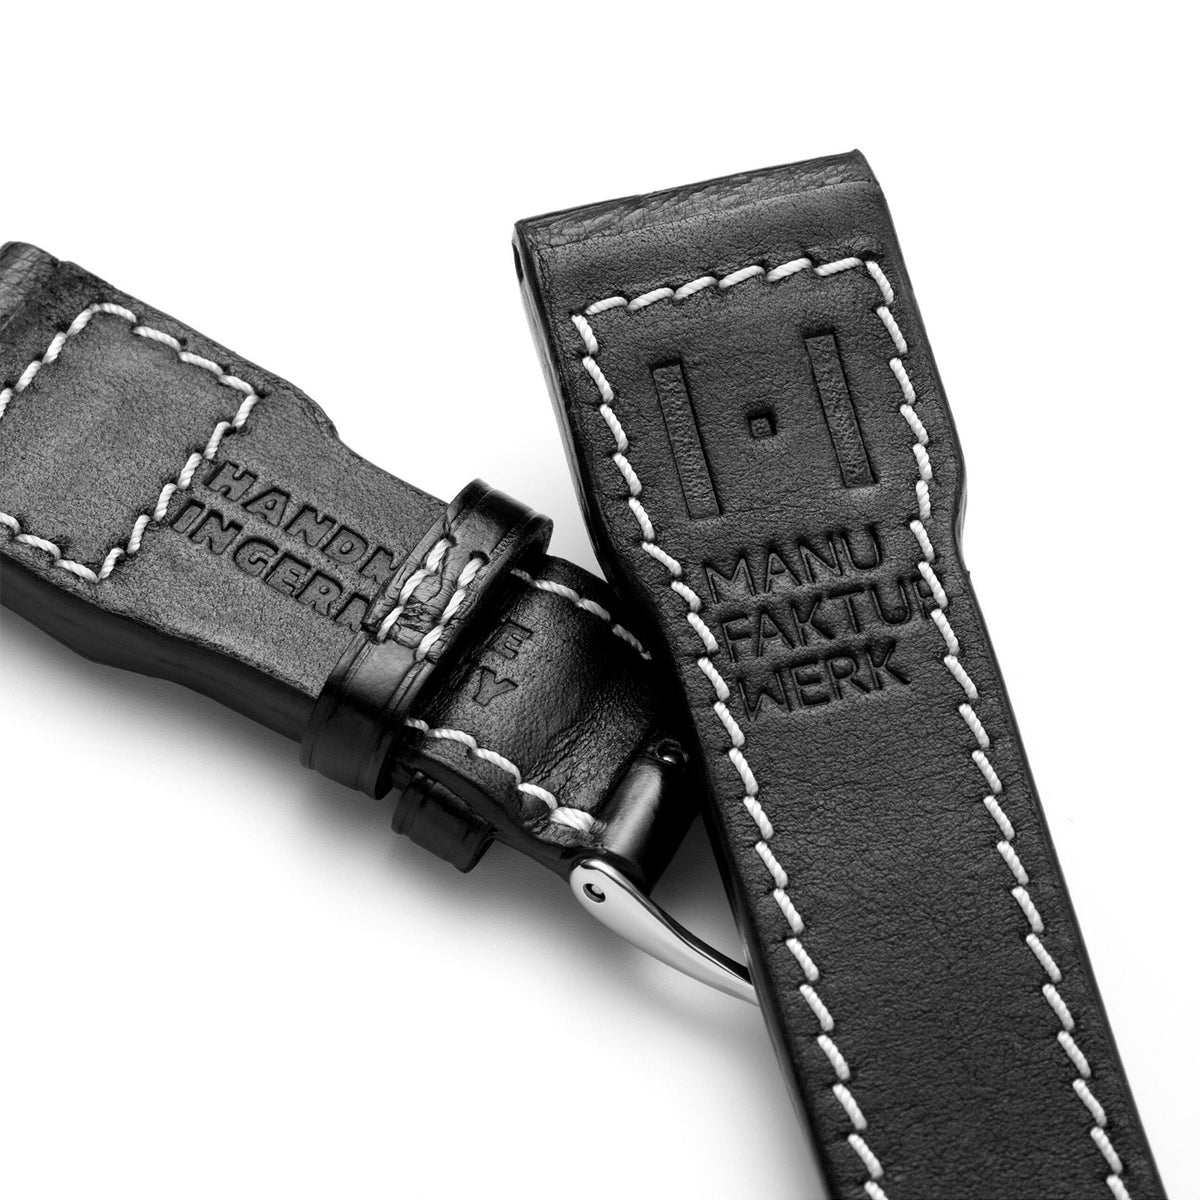 Alligator watch strap for large pilot&#39;s watch - compatible strap for the IWC BIG PILOT (strap not from IWC) - silver clasp